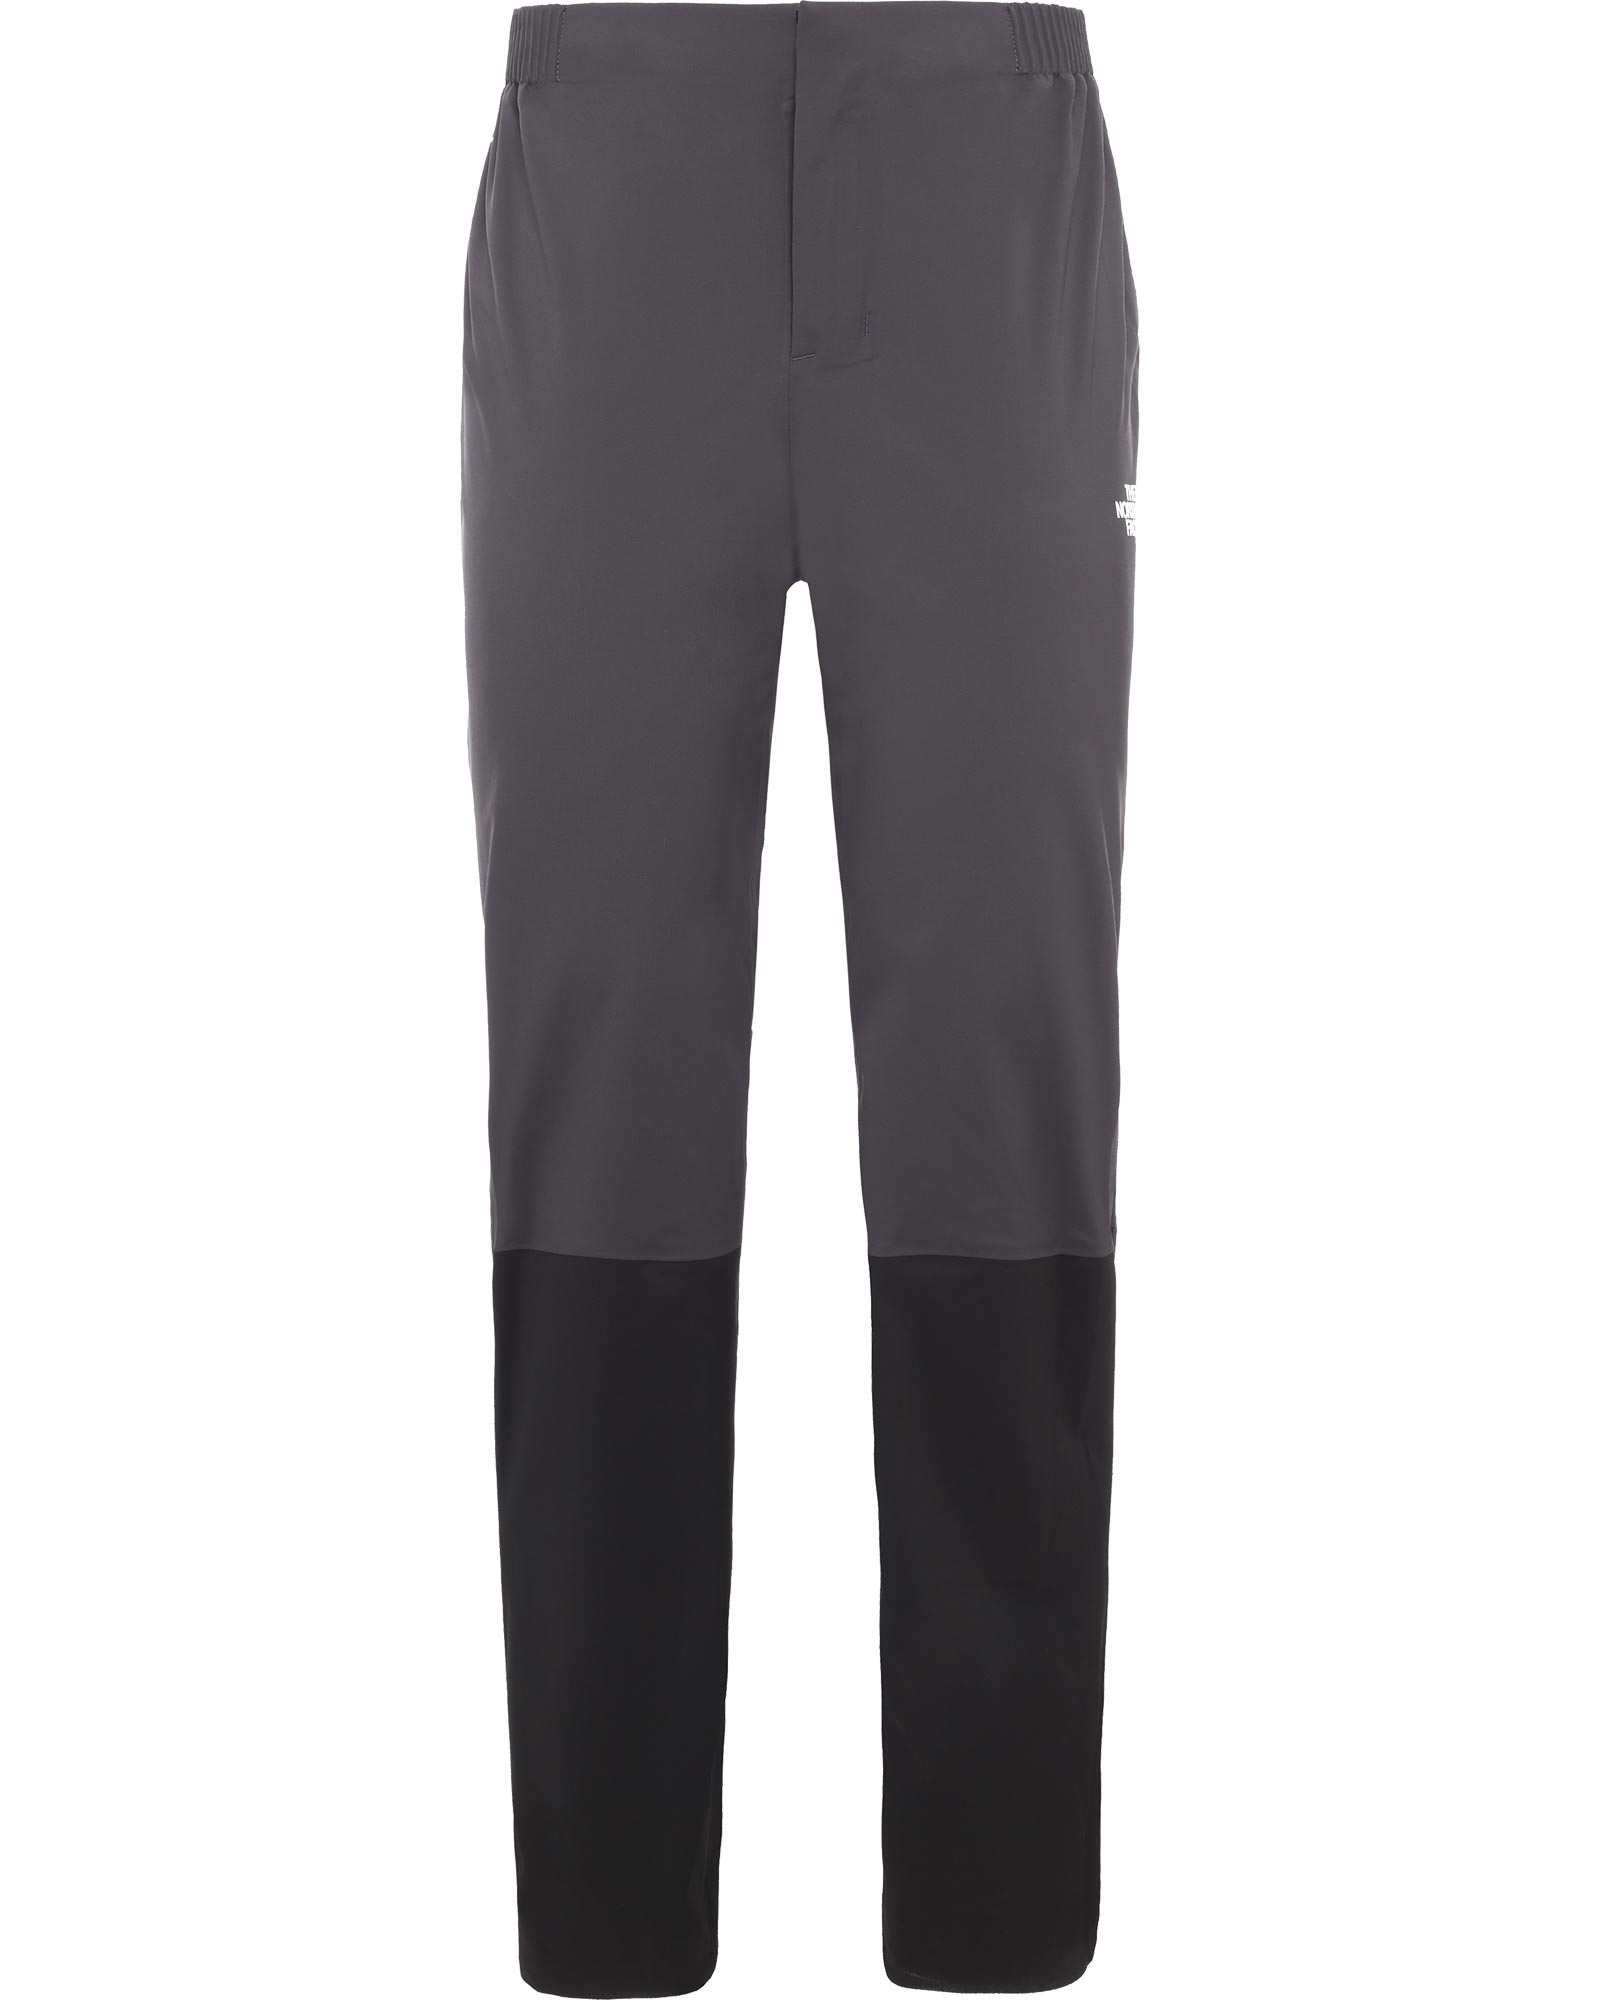 The North Face Impendor FUTURELIGHT Women’s Pants - Weathered Black XL